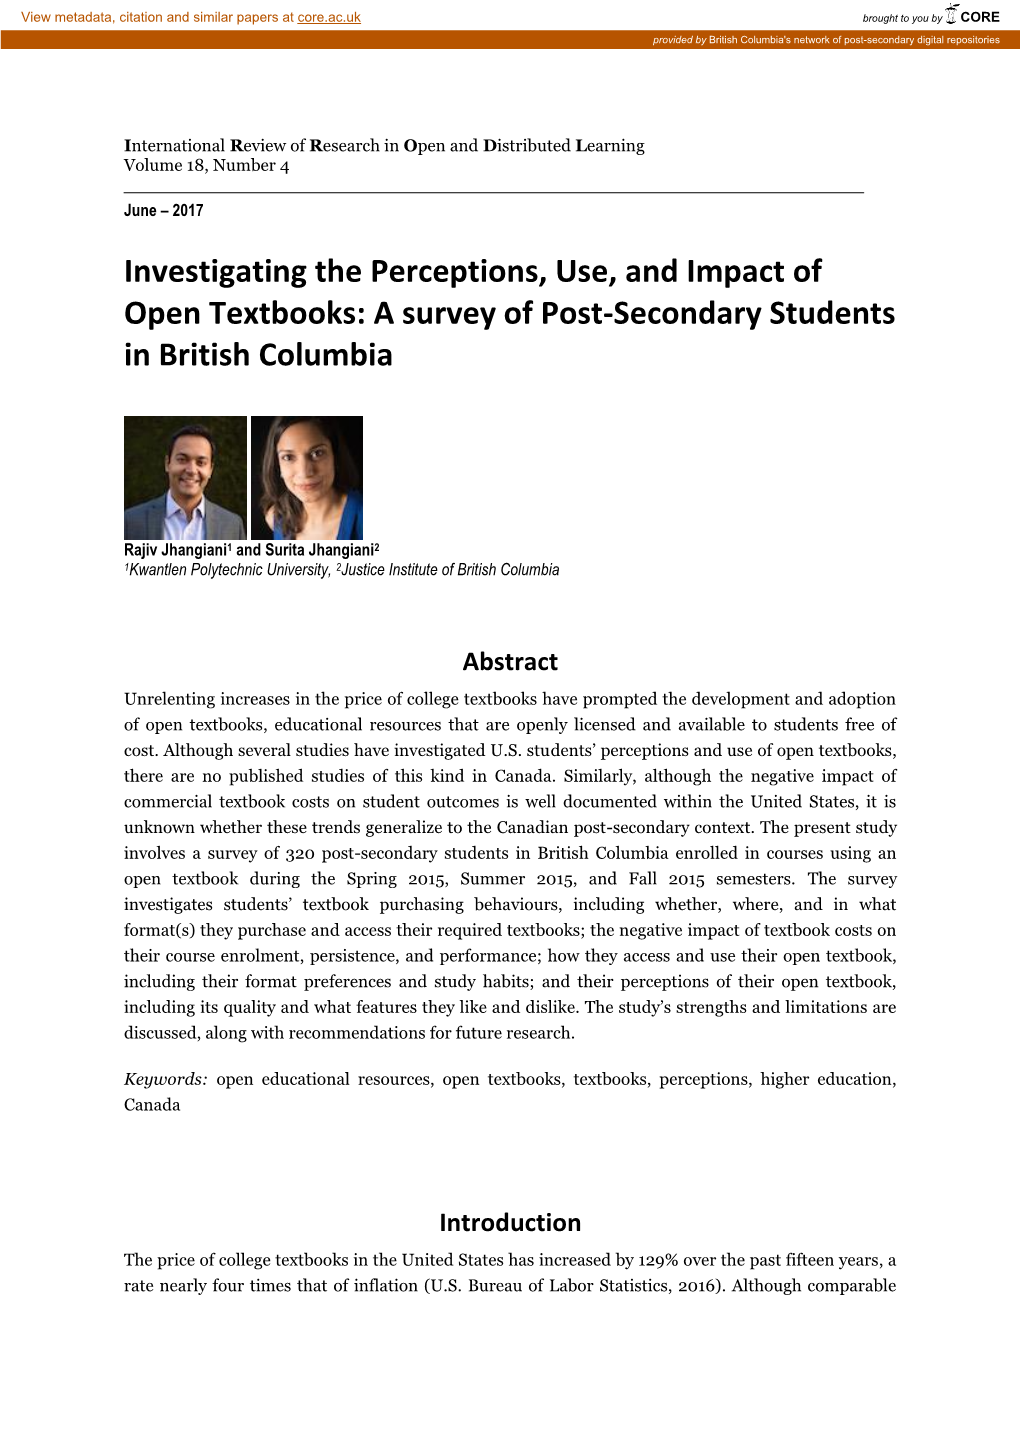 Investigating the Perceptions, Use, and Impact of Open Textbooks: a Survey of Post-Secondary Students in British Columbia